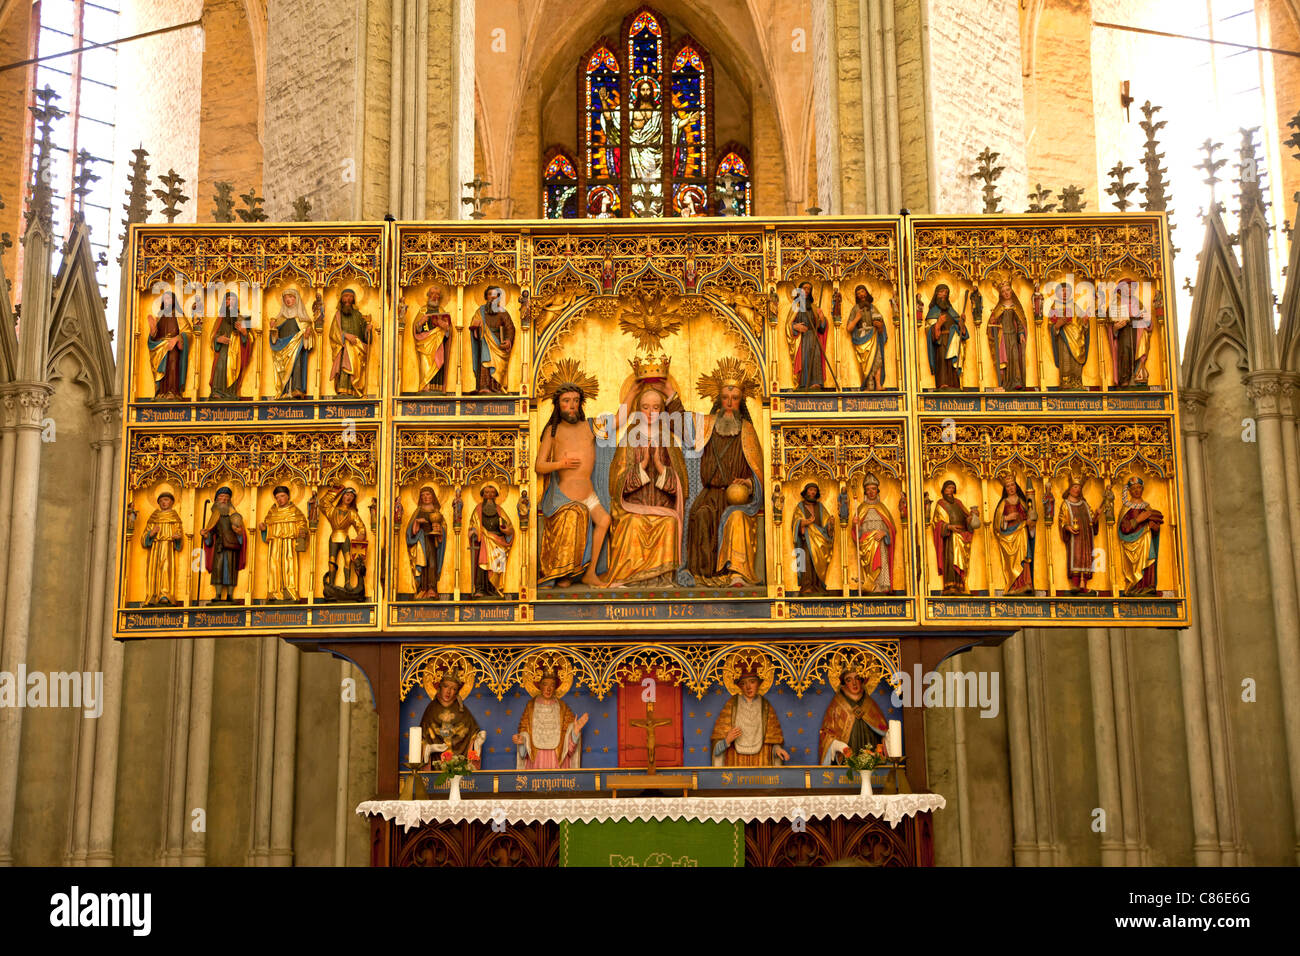 famous Altar of the Coronation Virgin Mary inside the Marienkirche or St. Mary's church, Hanseatic City of Stralsund,  Germany Stock Photo